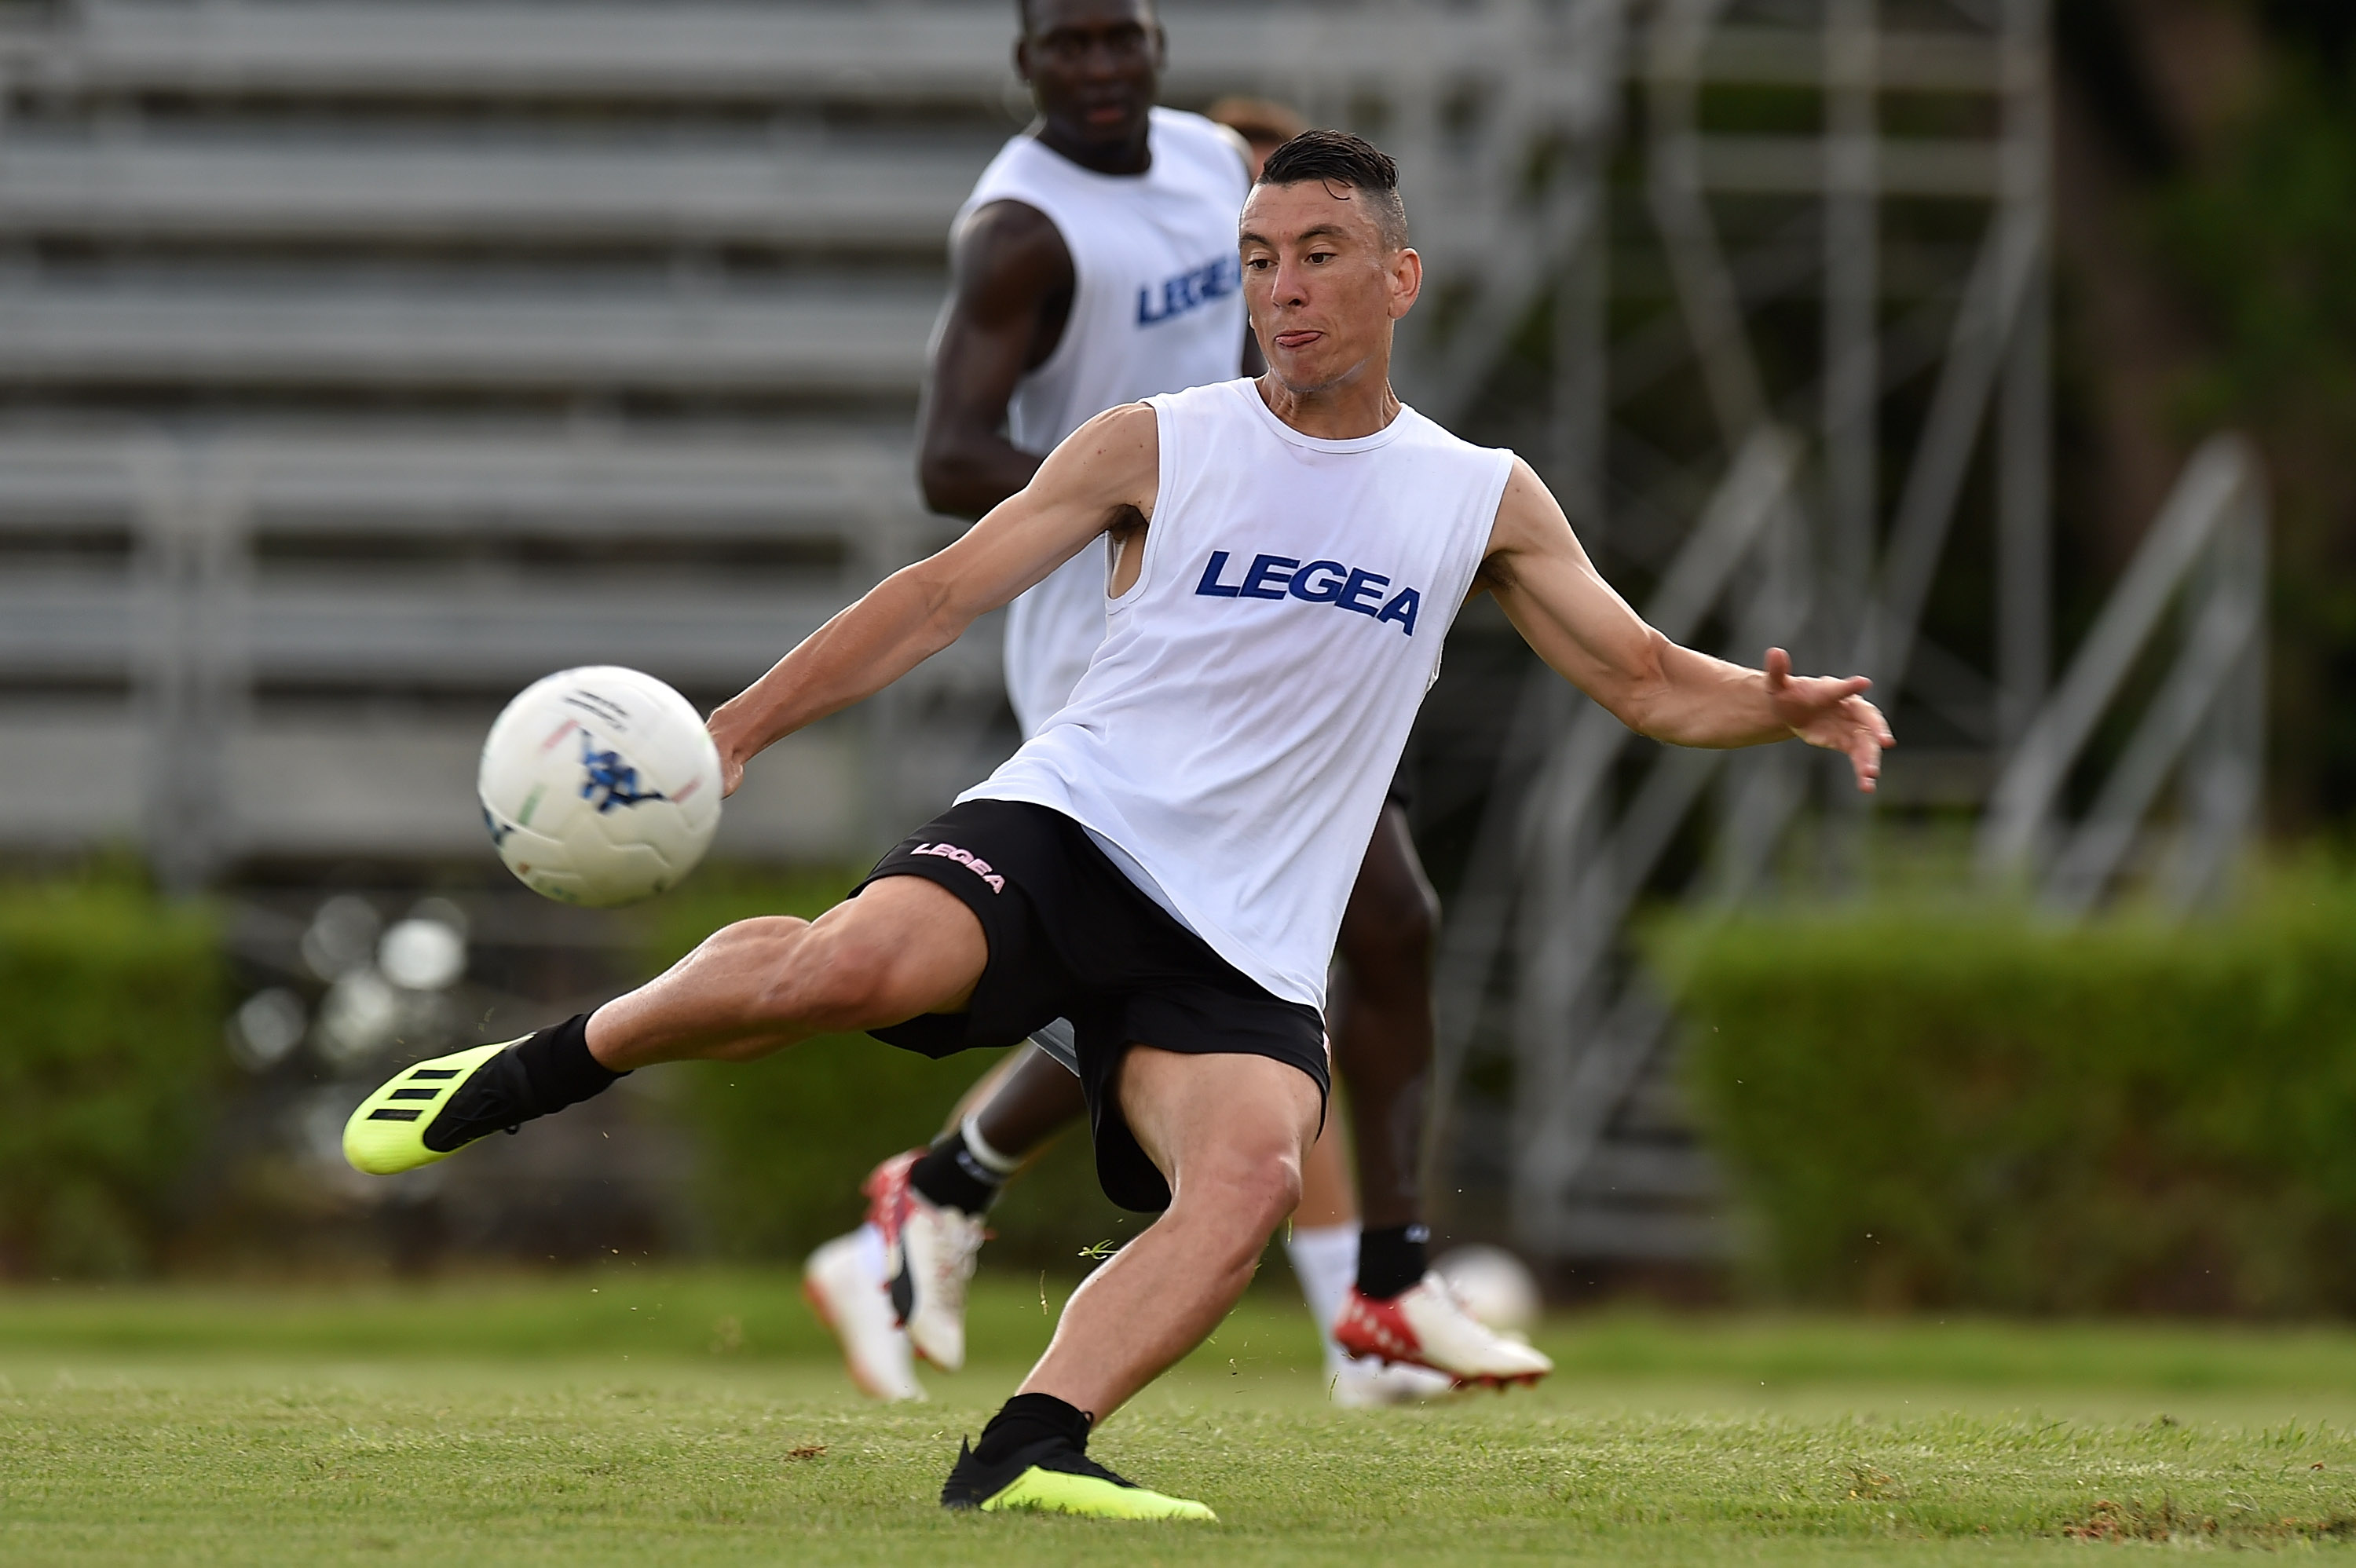 PALERMO, ITALY - AUGUST 16:  Cesar Falletti in action during a US Citta' di Palermo training session at Carmelo Onorato training center on August 16, 2018 in Palermo, Italy.  (Photo by Tullio M. Puglia/Getty Images)